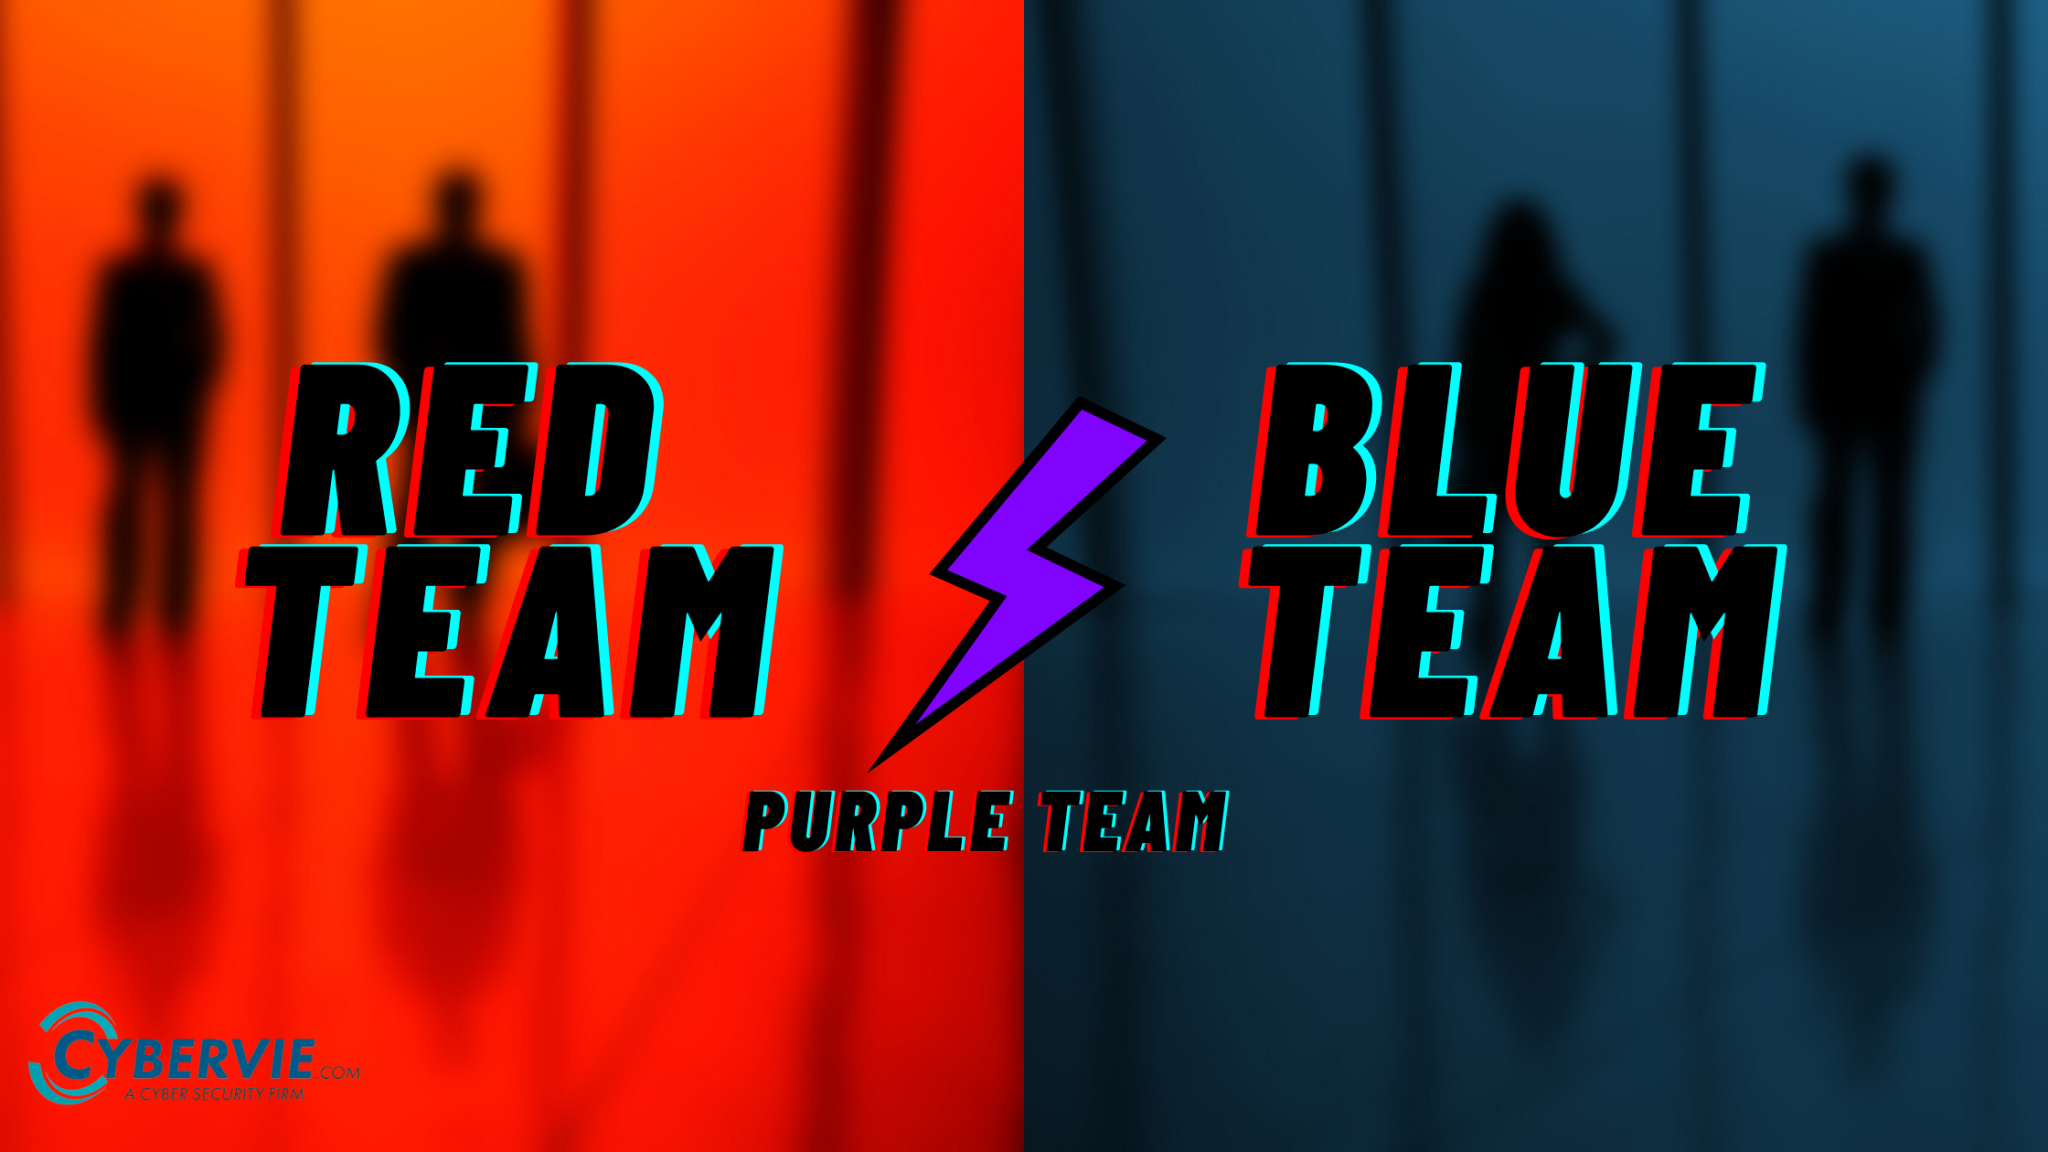 What is Red Team, Blue Team, Purple Team in Cybersecurity?